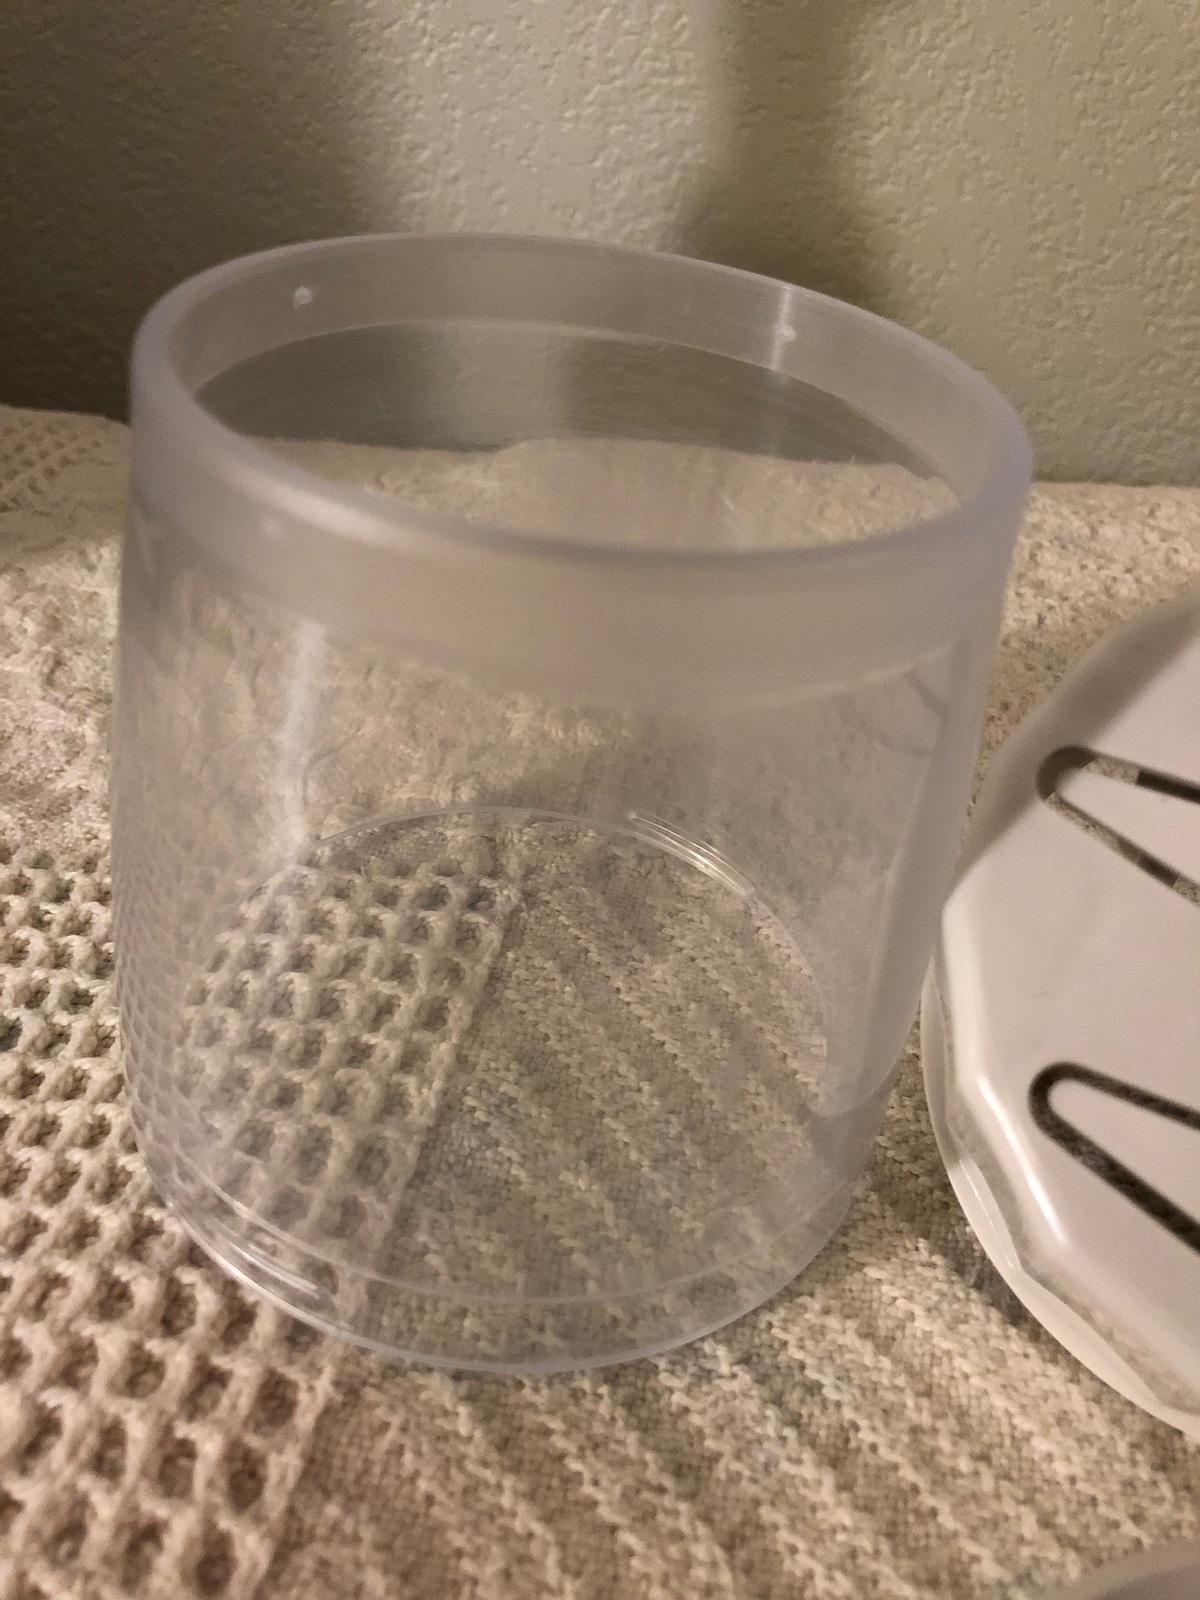 pampered chef chopper review